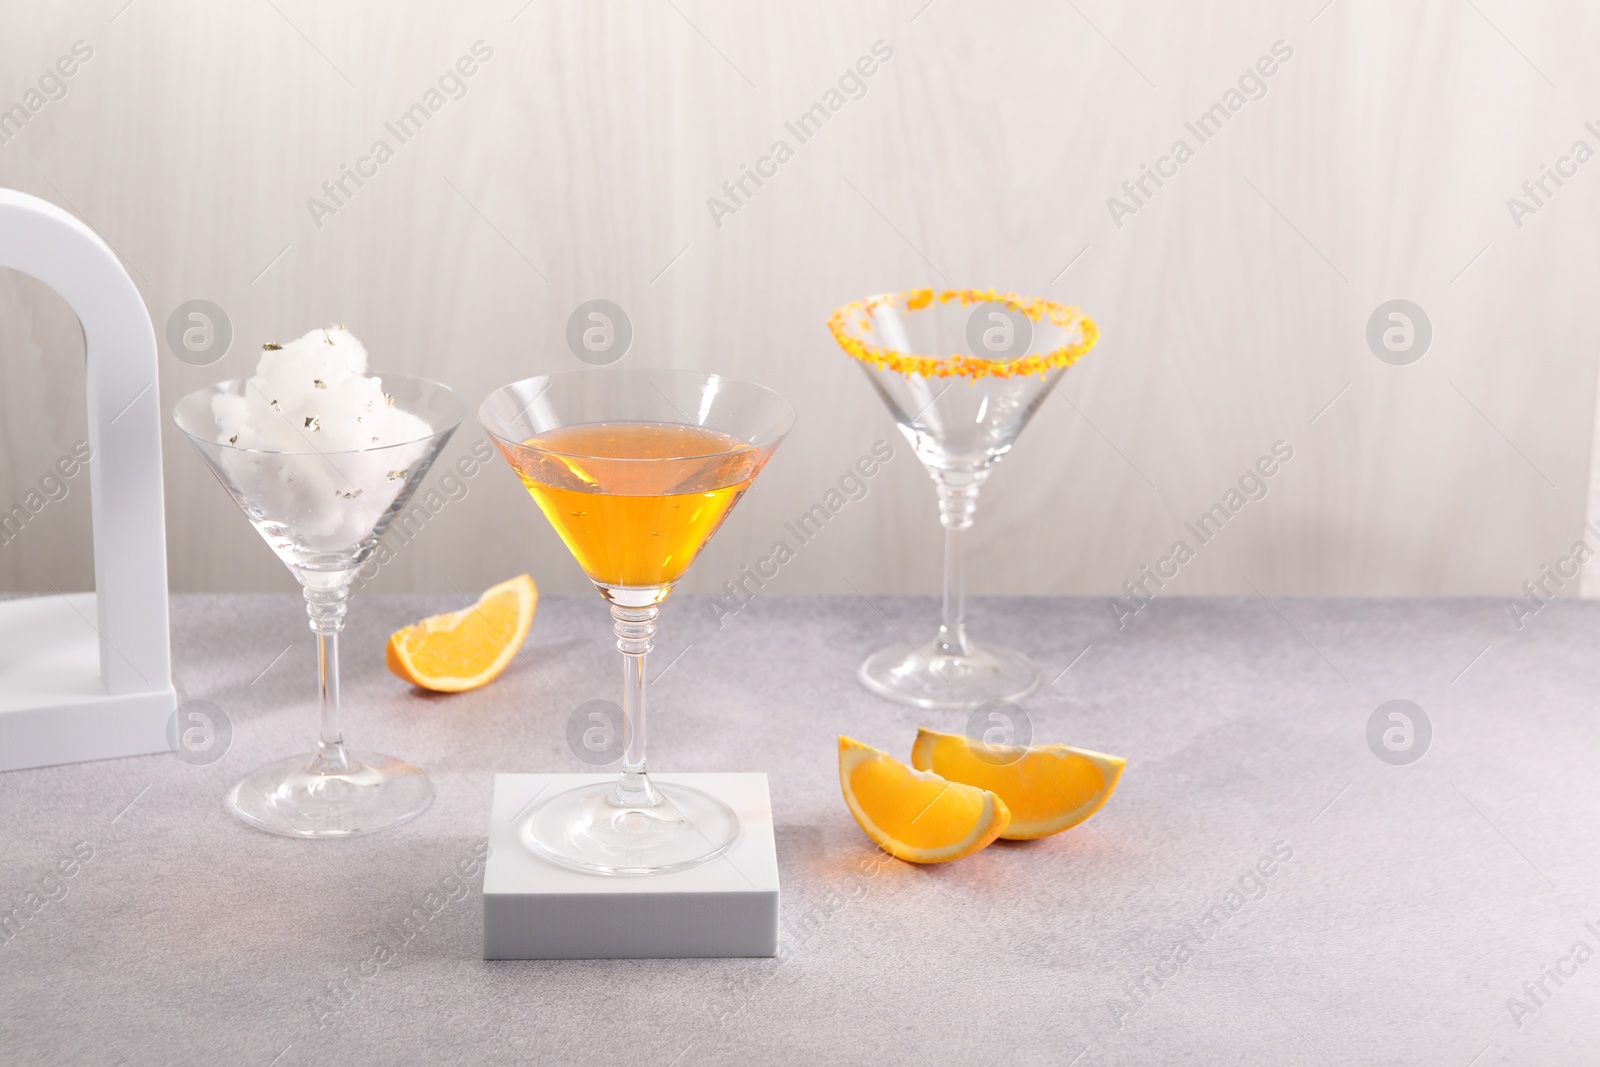 Photo of Cotton candy and cocktails in glasses on gray table, space for text